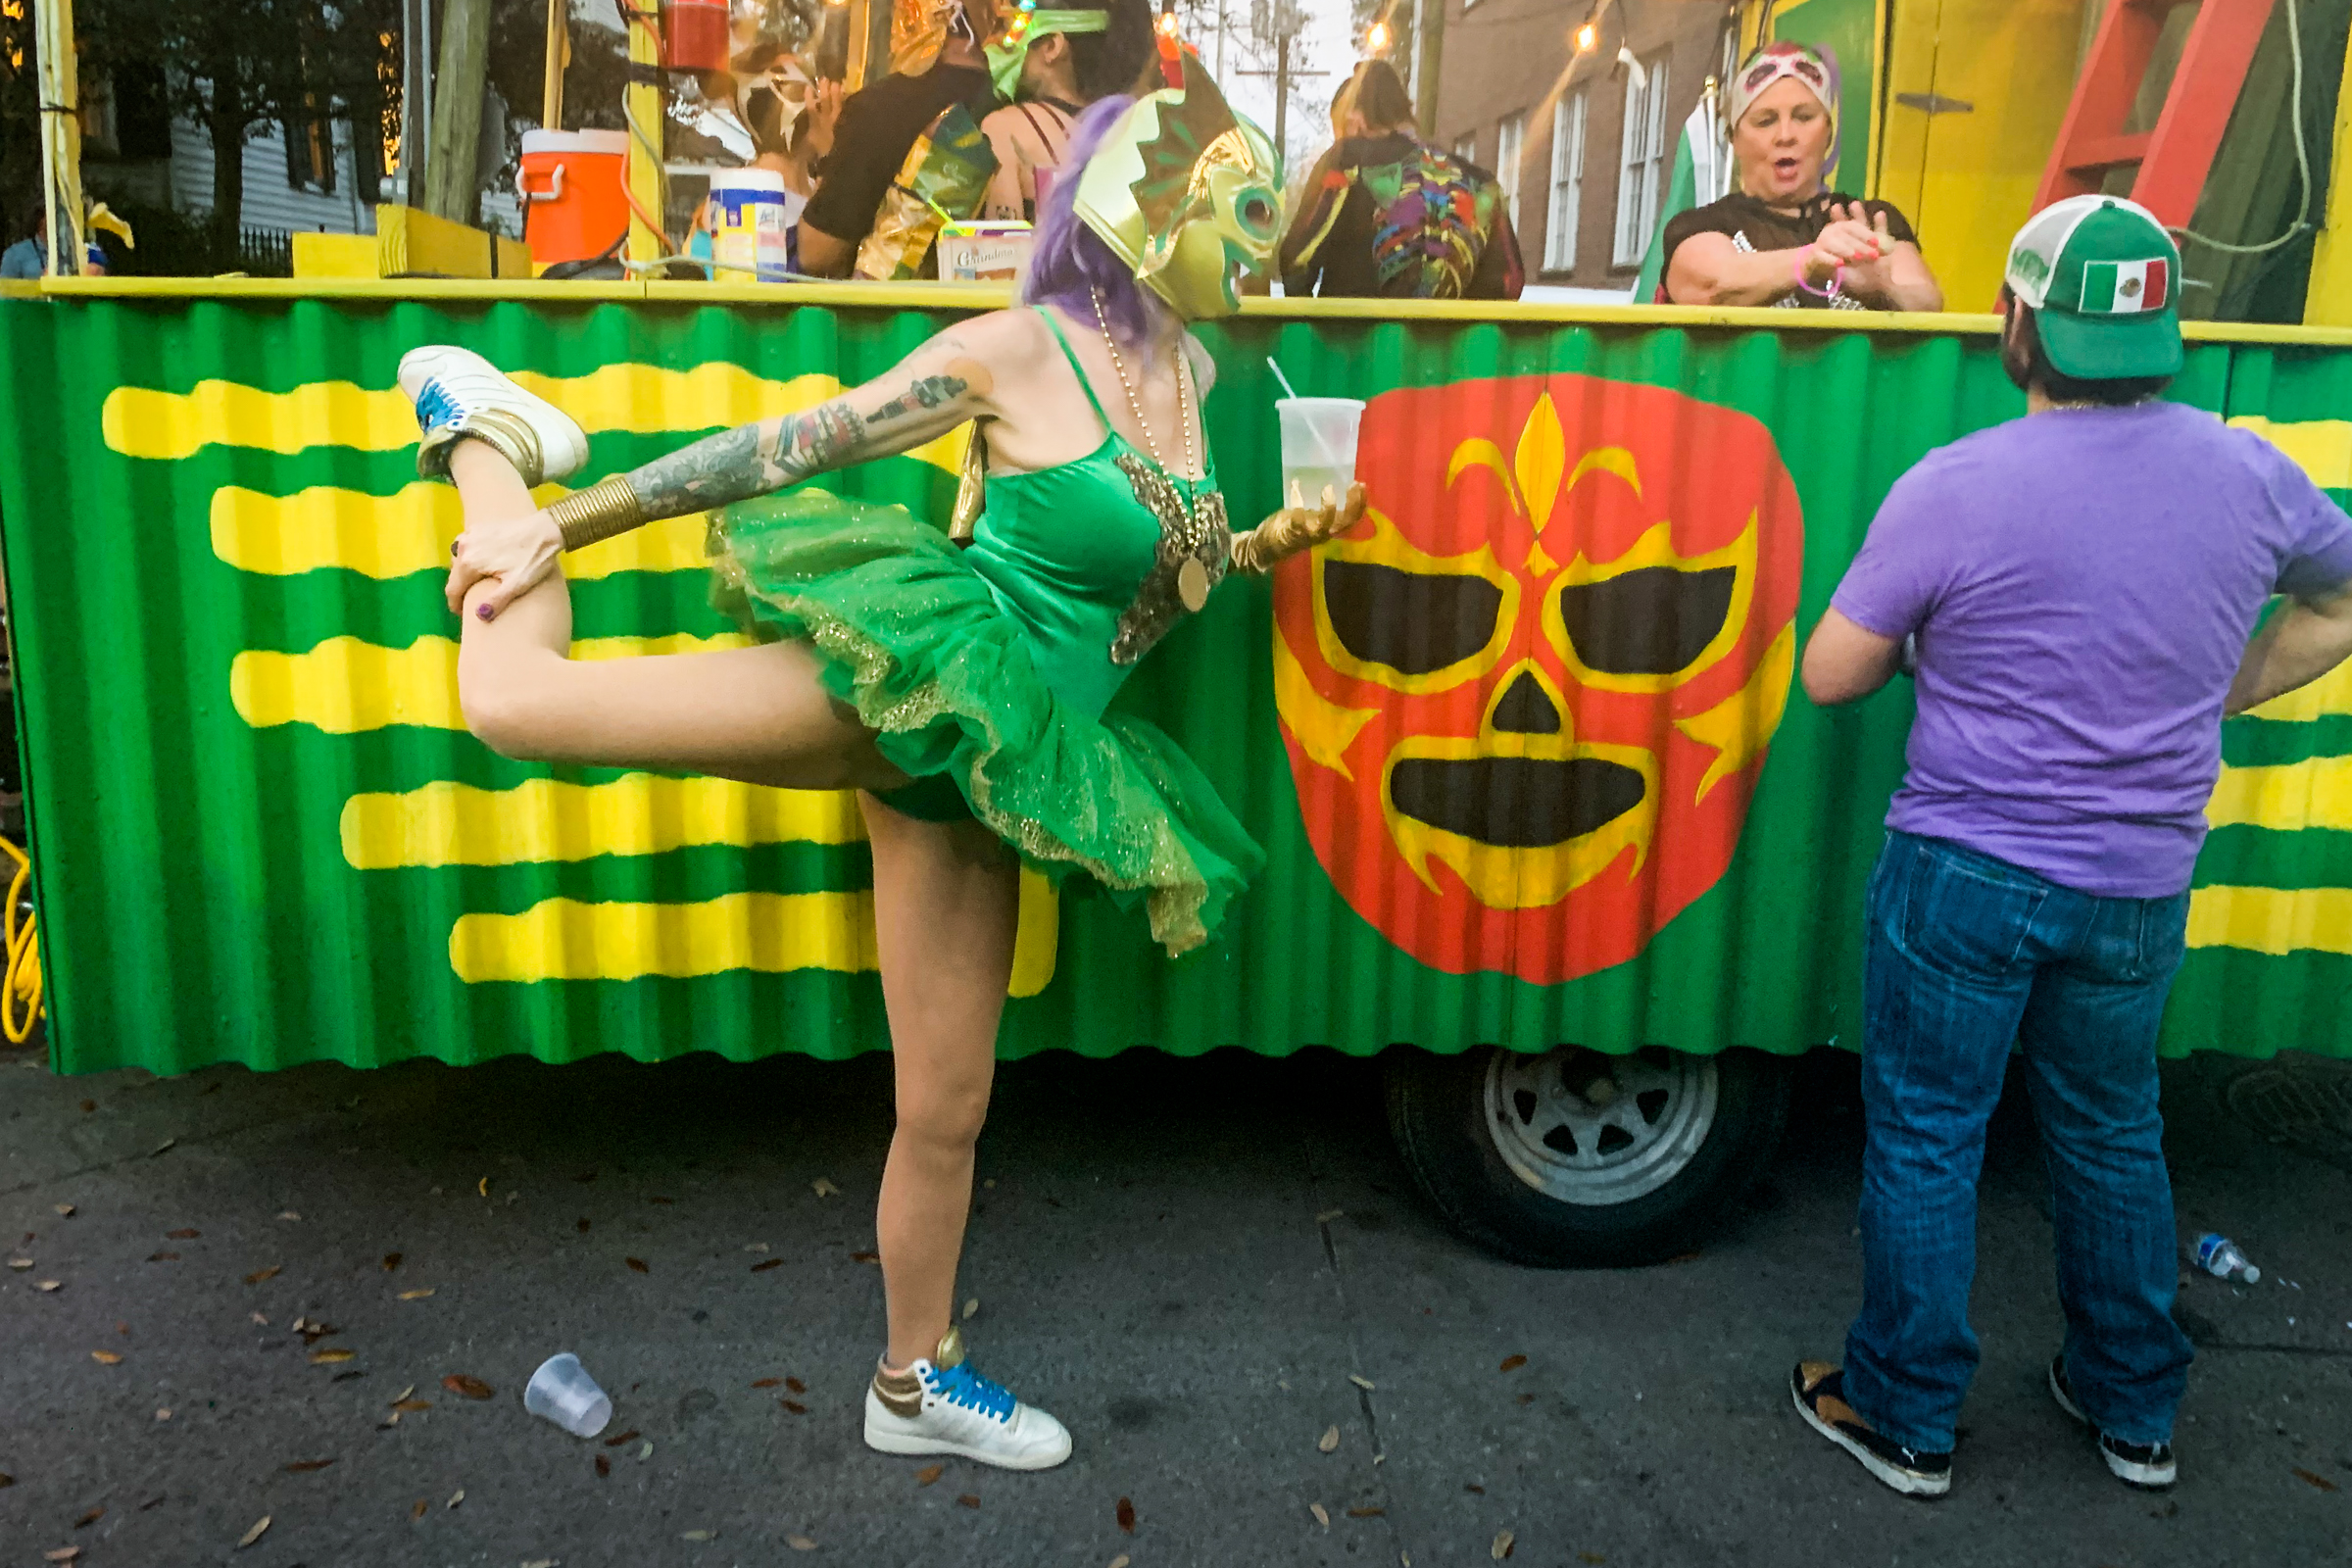 Meghan, a member of Lucha Krewe, stretches before the parade